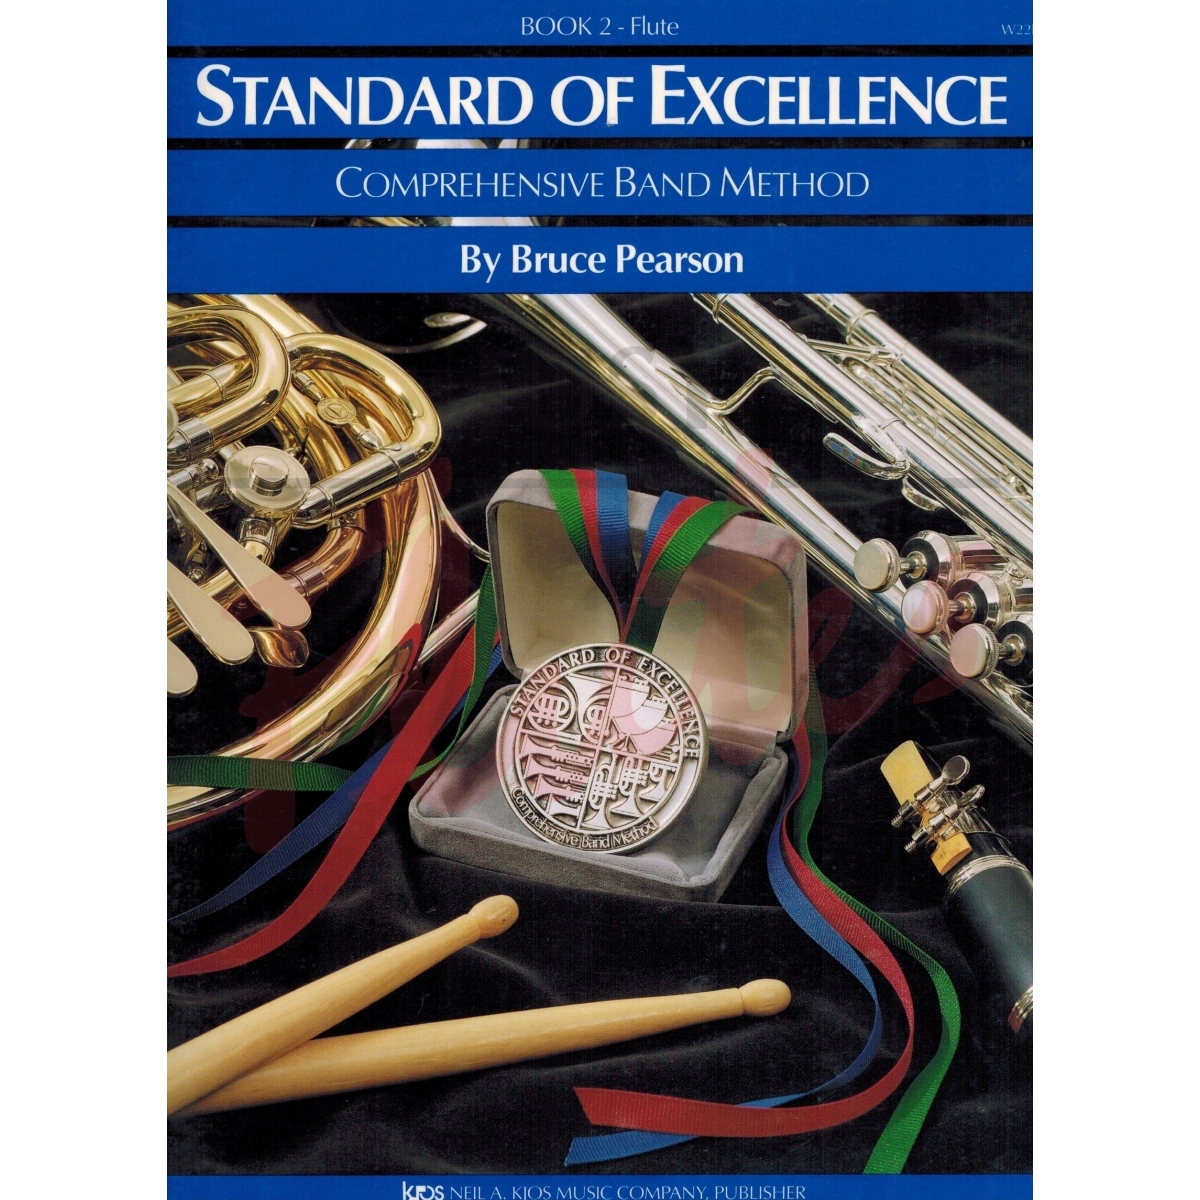 Standard of Excellence [Flute] Book 2